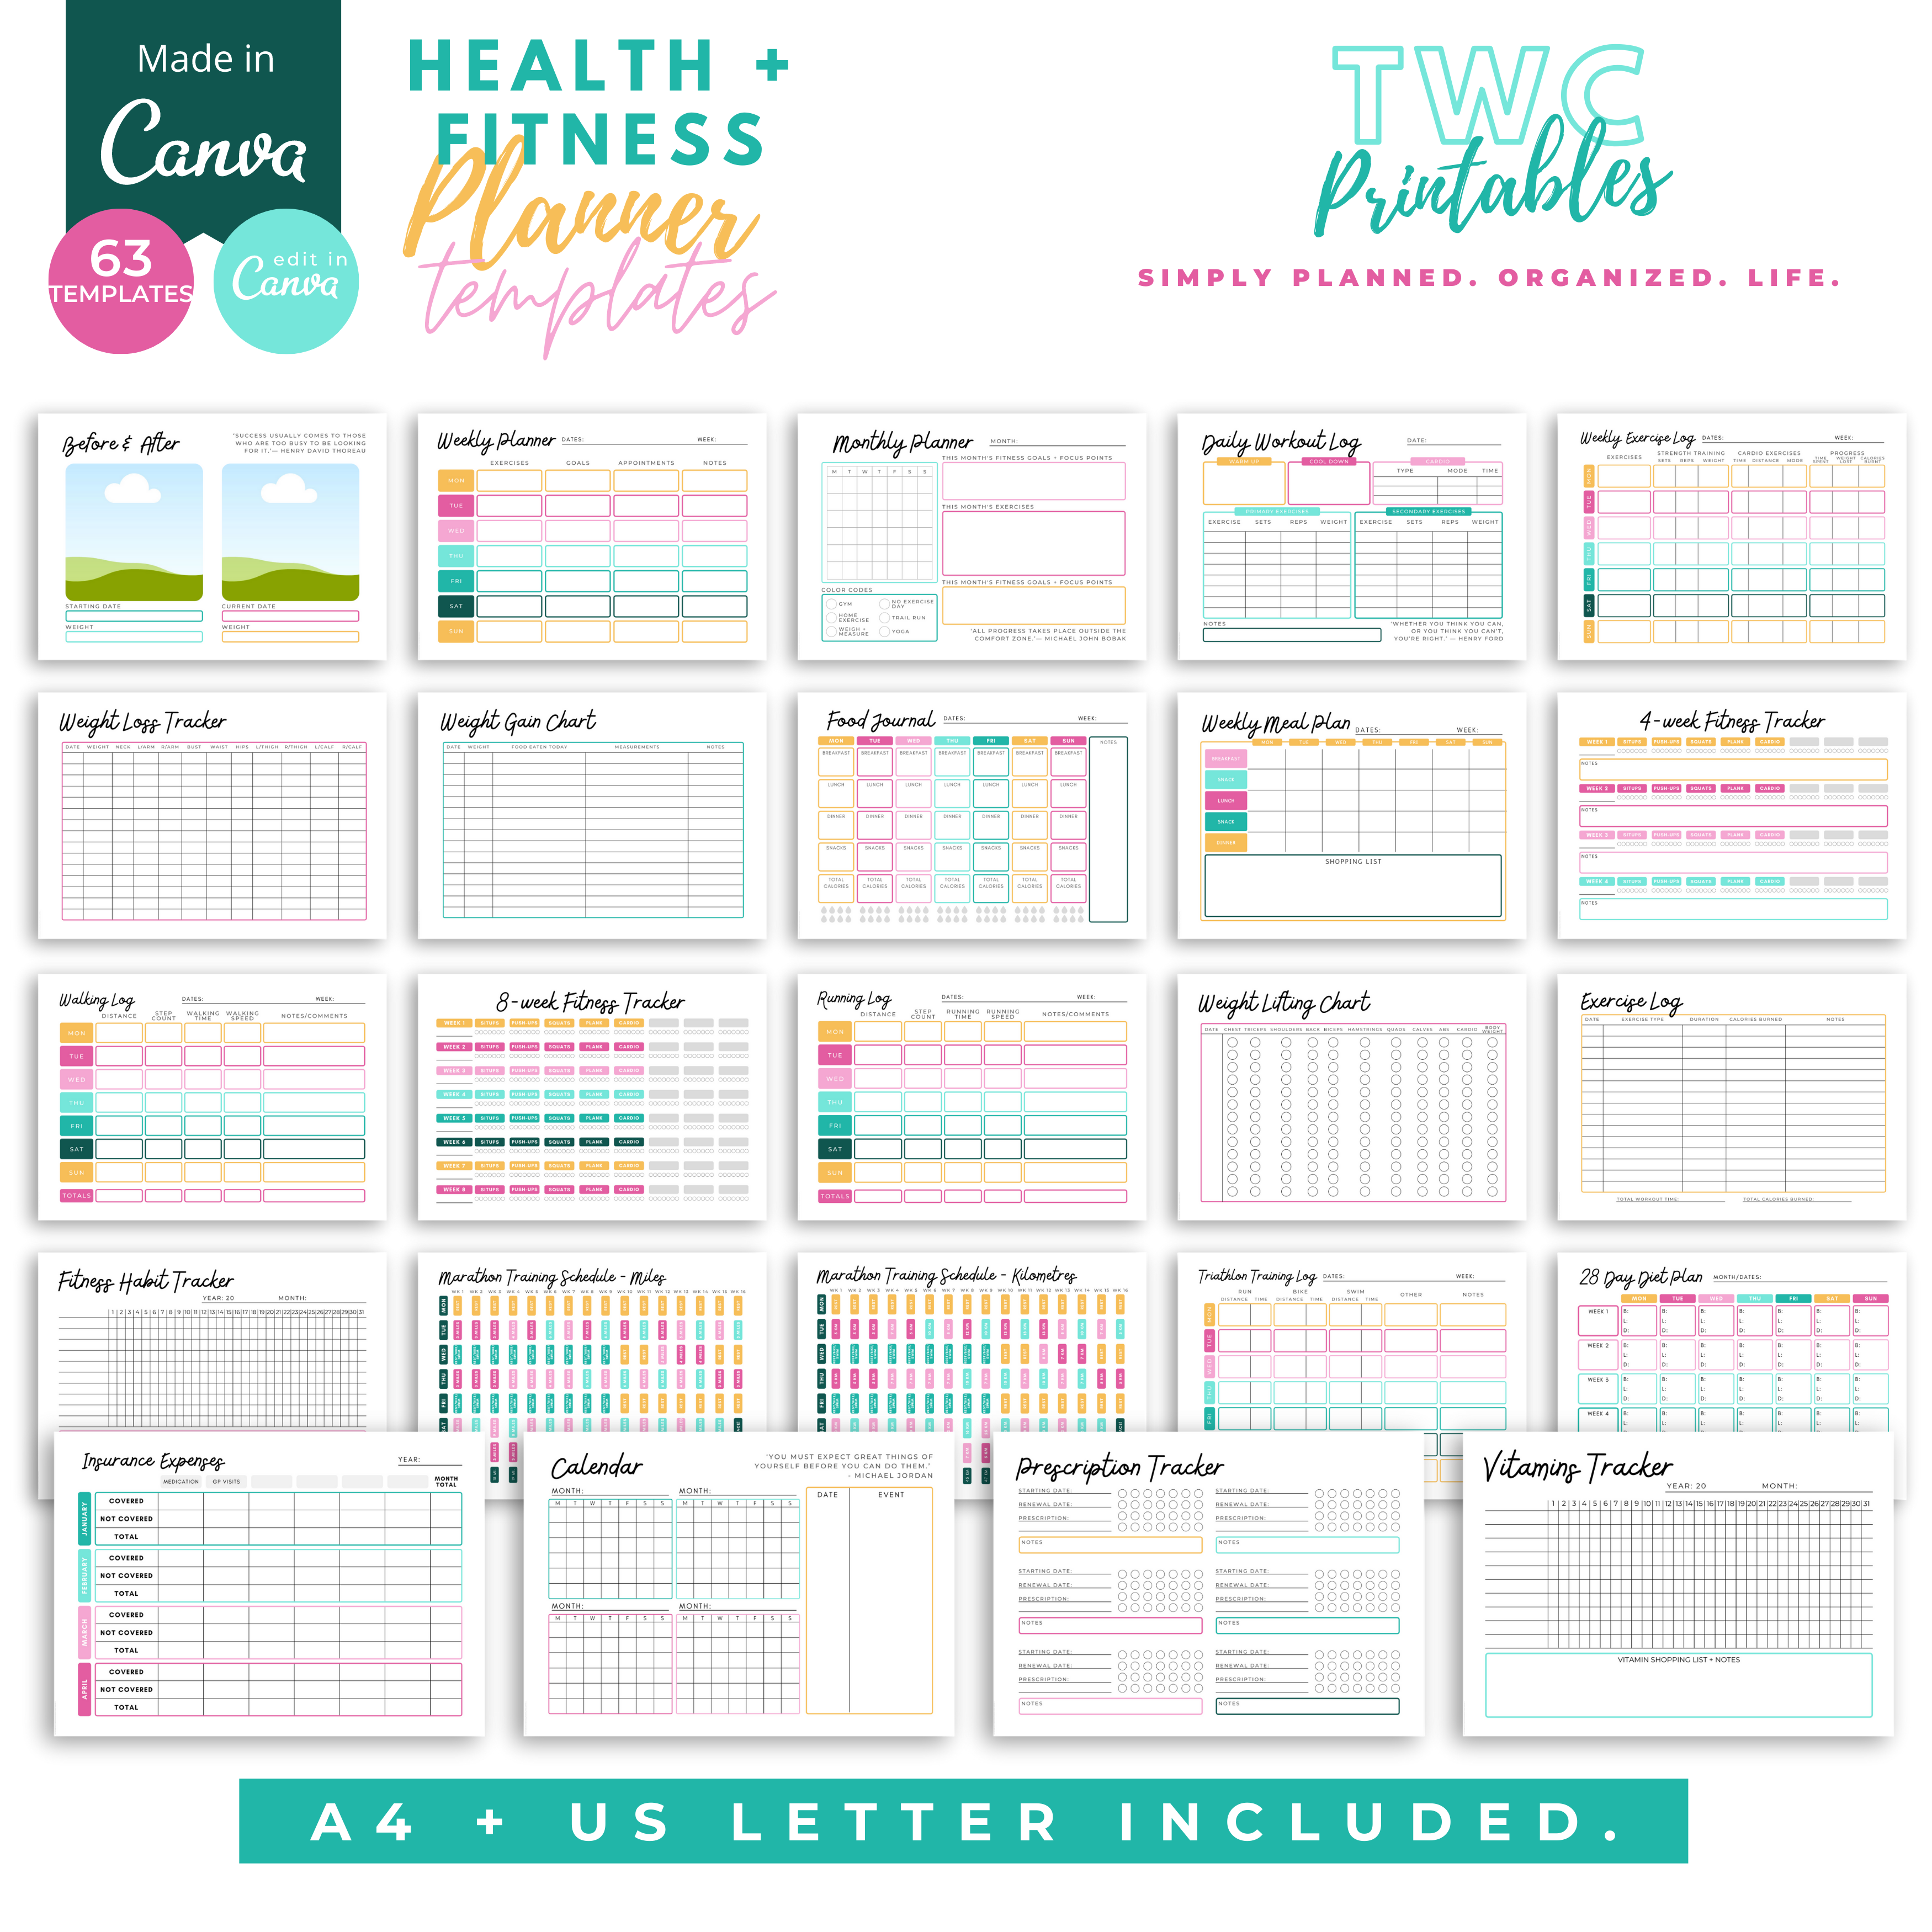 Create your own health & fitness planner with these editable template sheets for Canva! Includes plenty of trackers, charts, checklists, and more to keep your lifestyle organized! This planner is designed with beautiful colors and motifs, which can be changed to your liking or used as is...